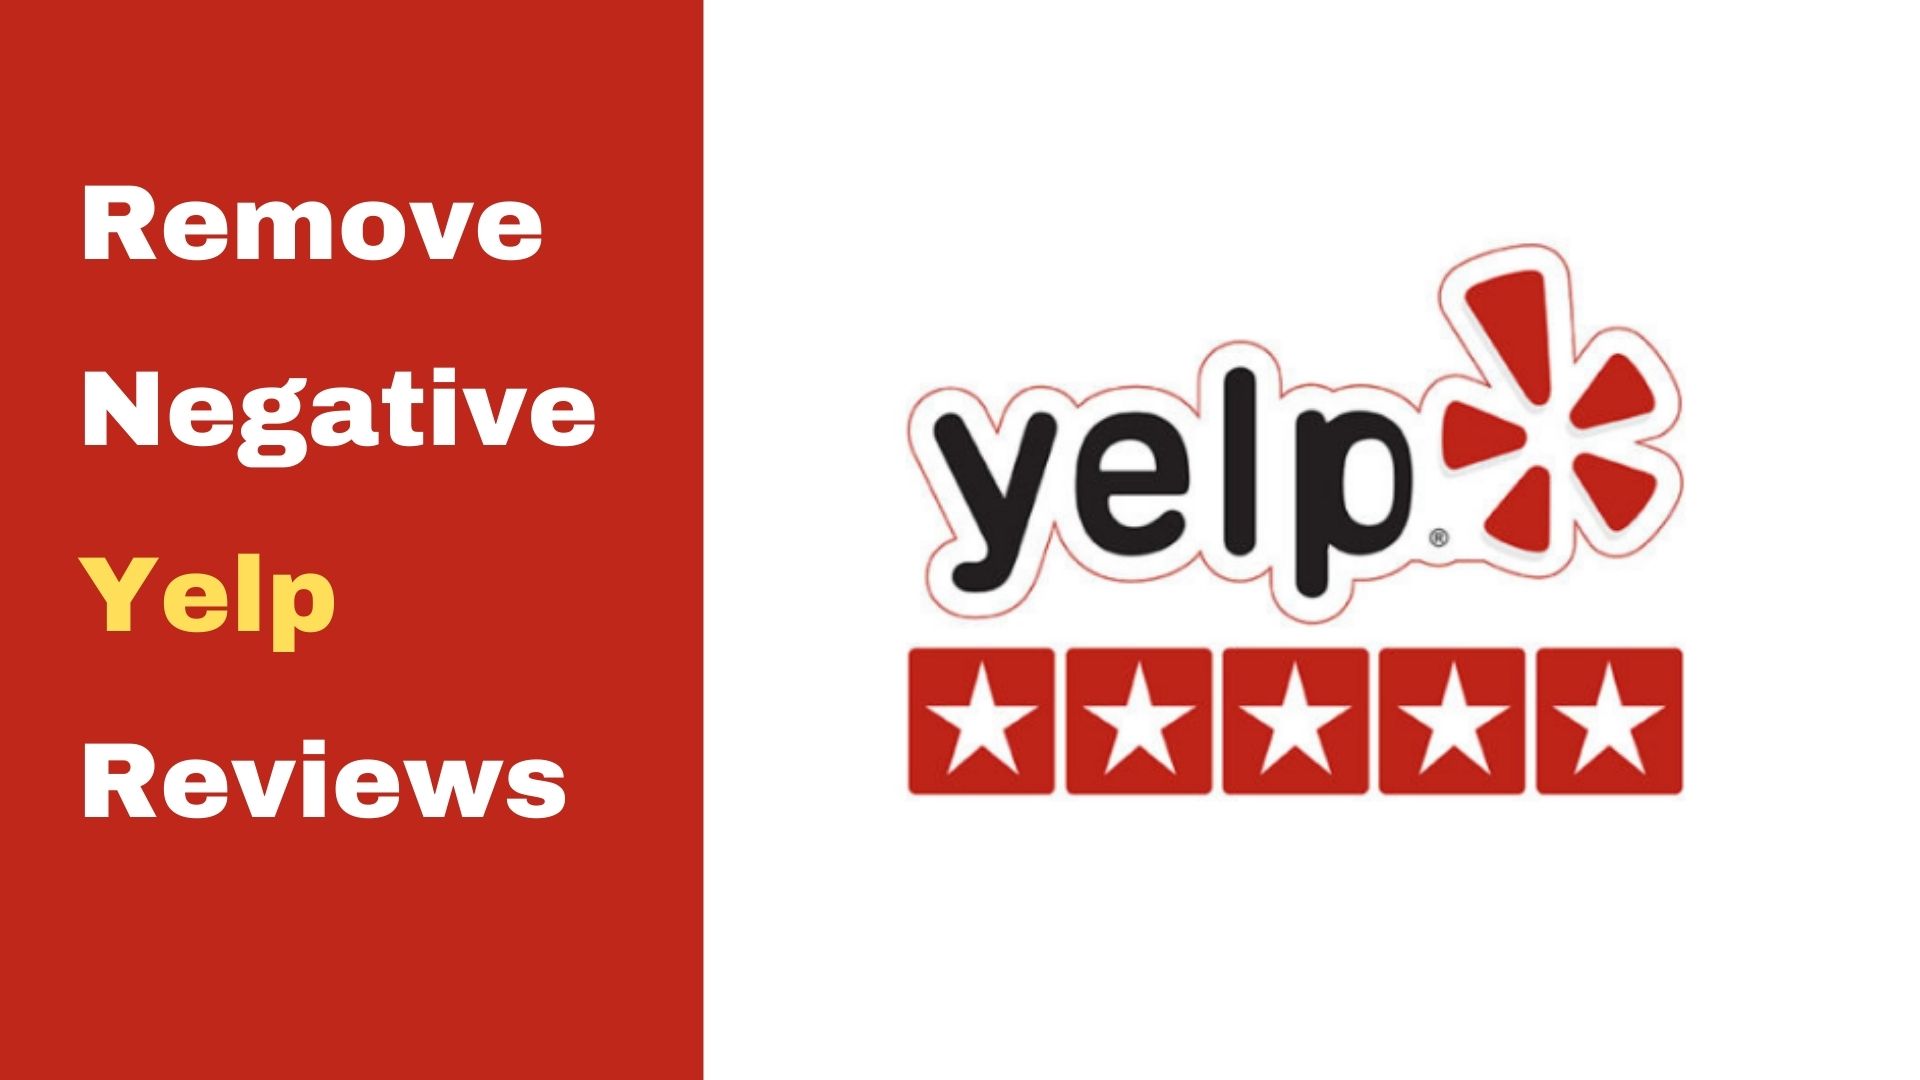 I will help you to remove bad reviews on your yelp account